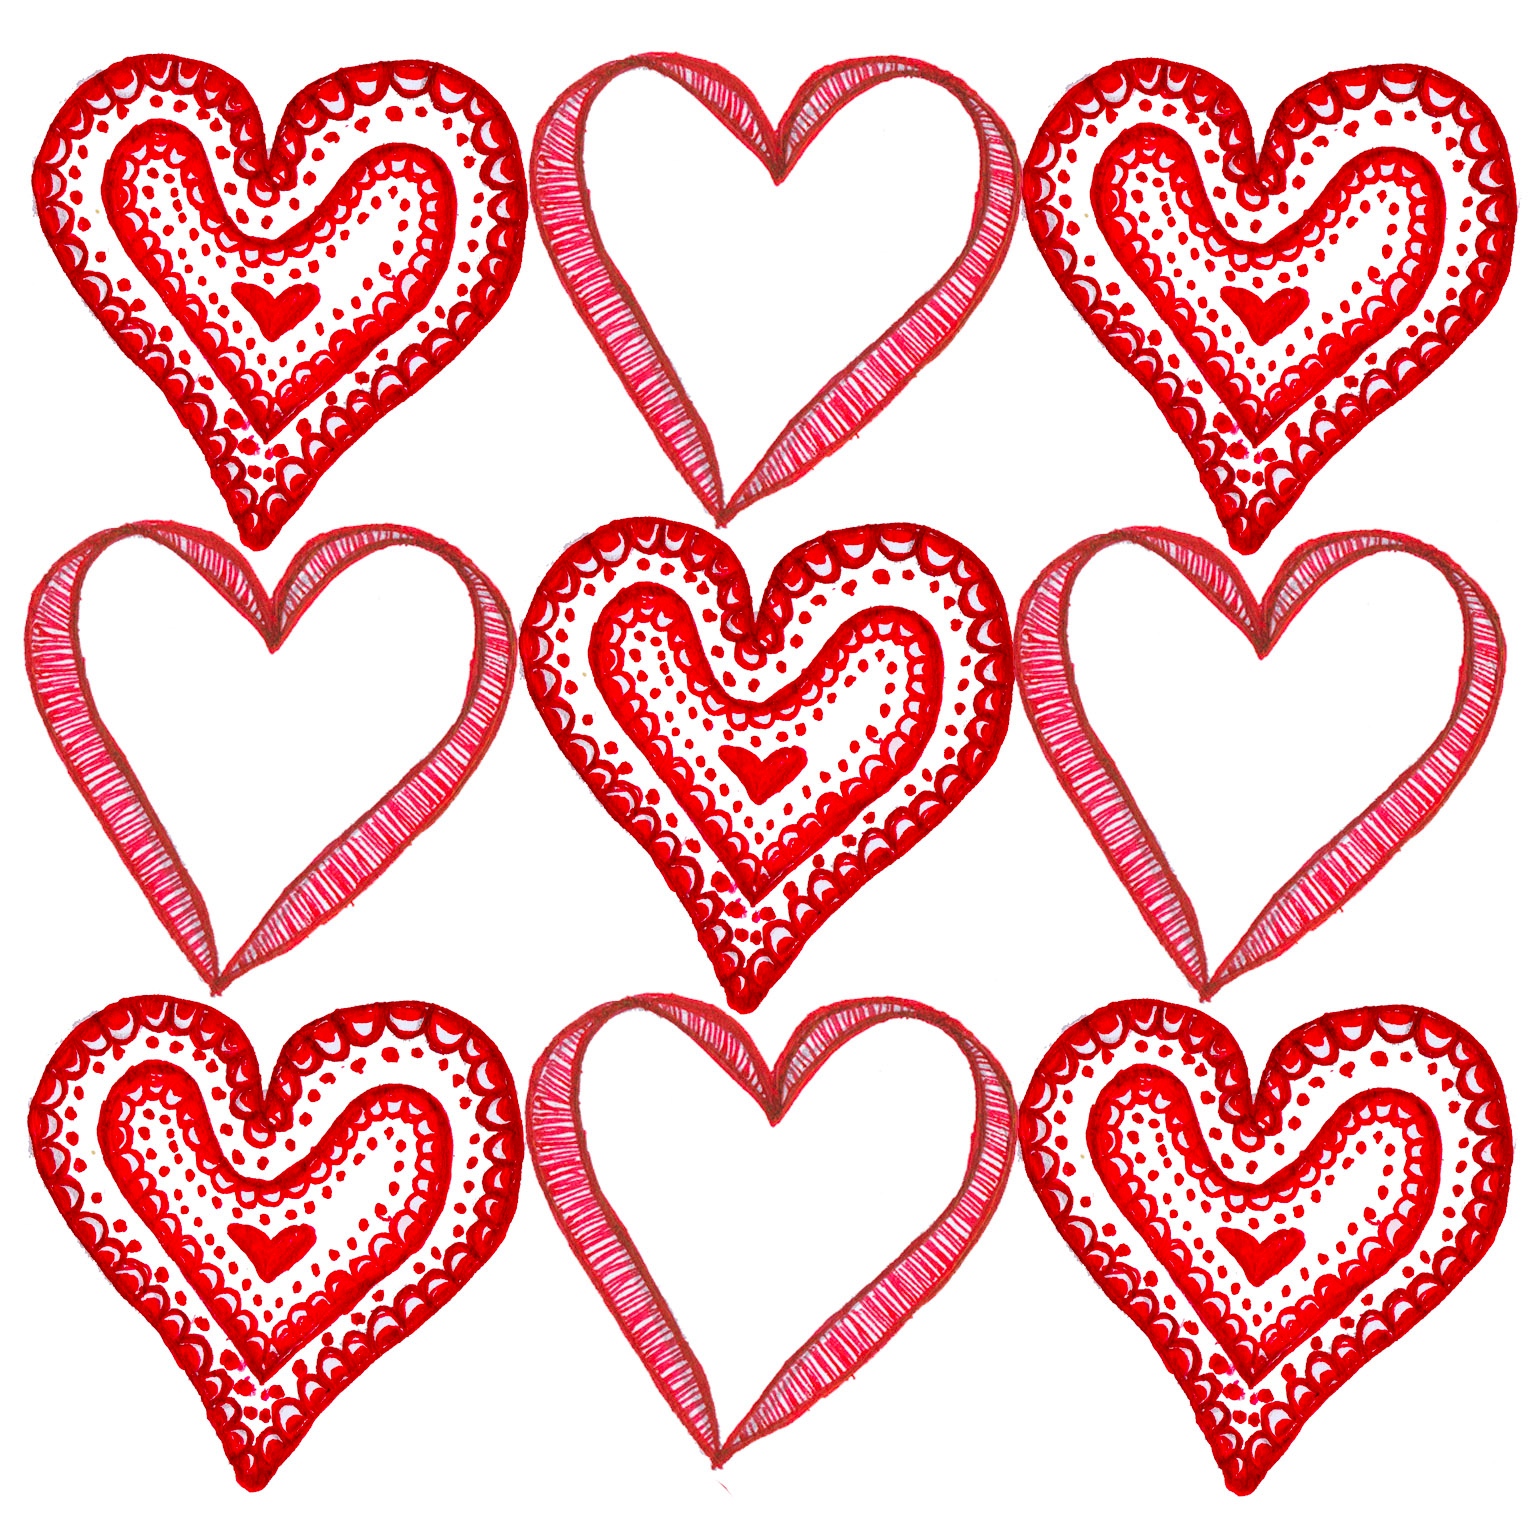 Valentines Day Hearts Pictures - Valentines Day Hearts Wallpapers ...